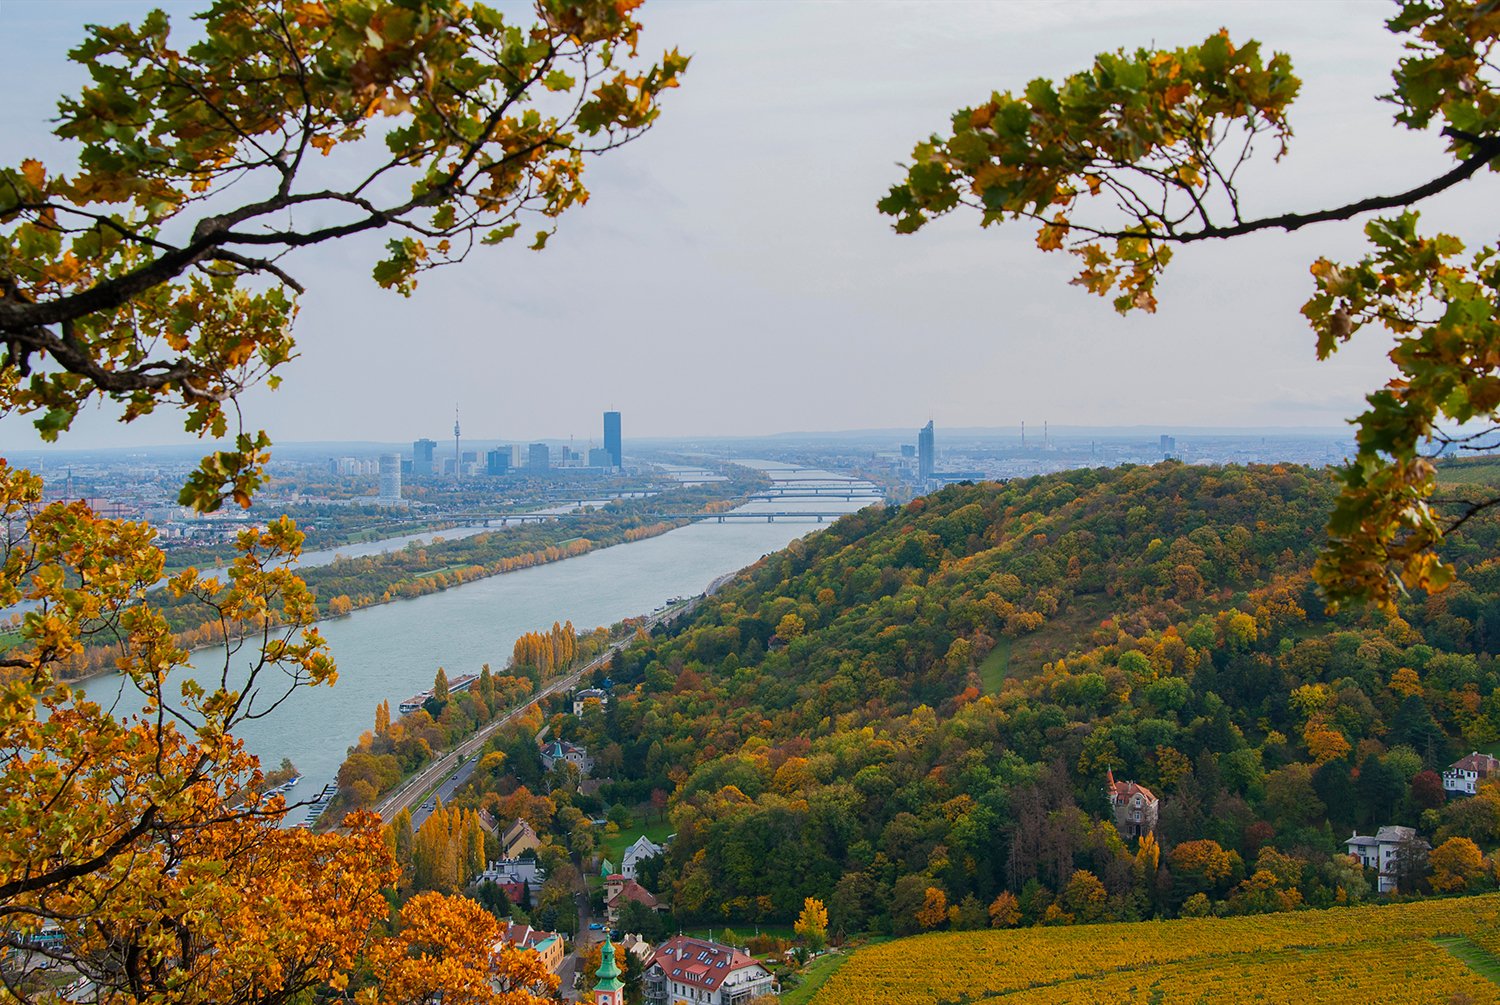 View of the Danube River and the city of Vienna, Austria on an autumn day